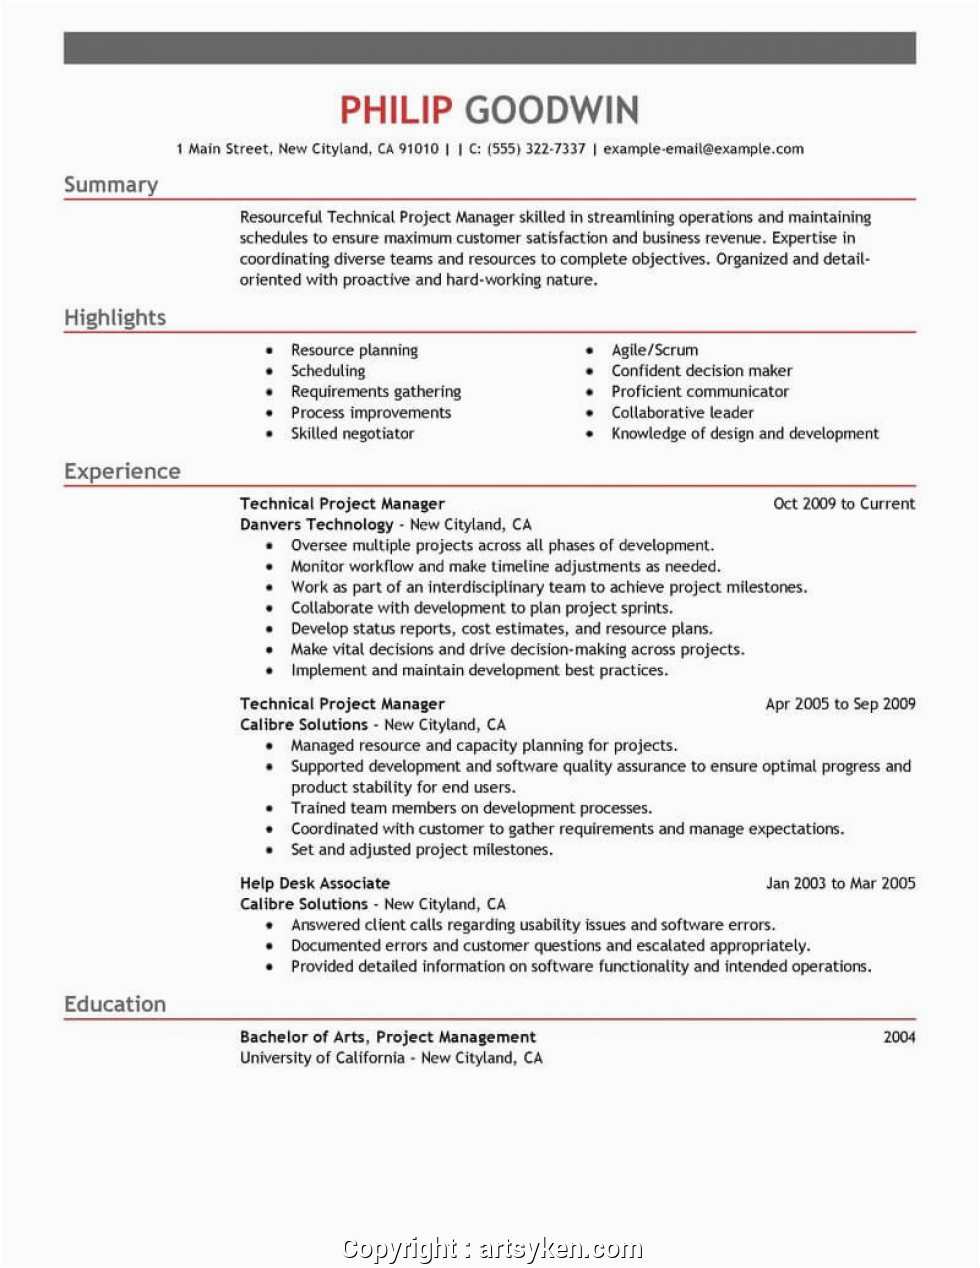 Sample Resume for Project Manager It software India Modern Resume Program Manager software Templates